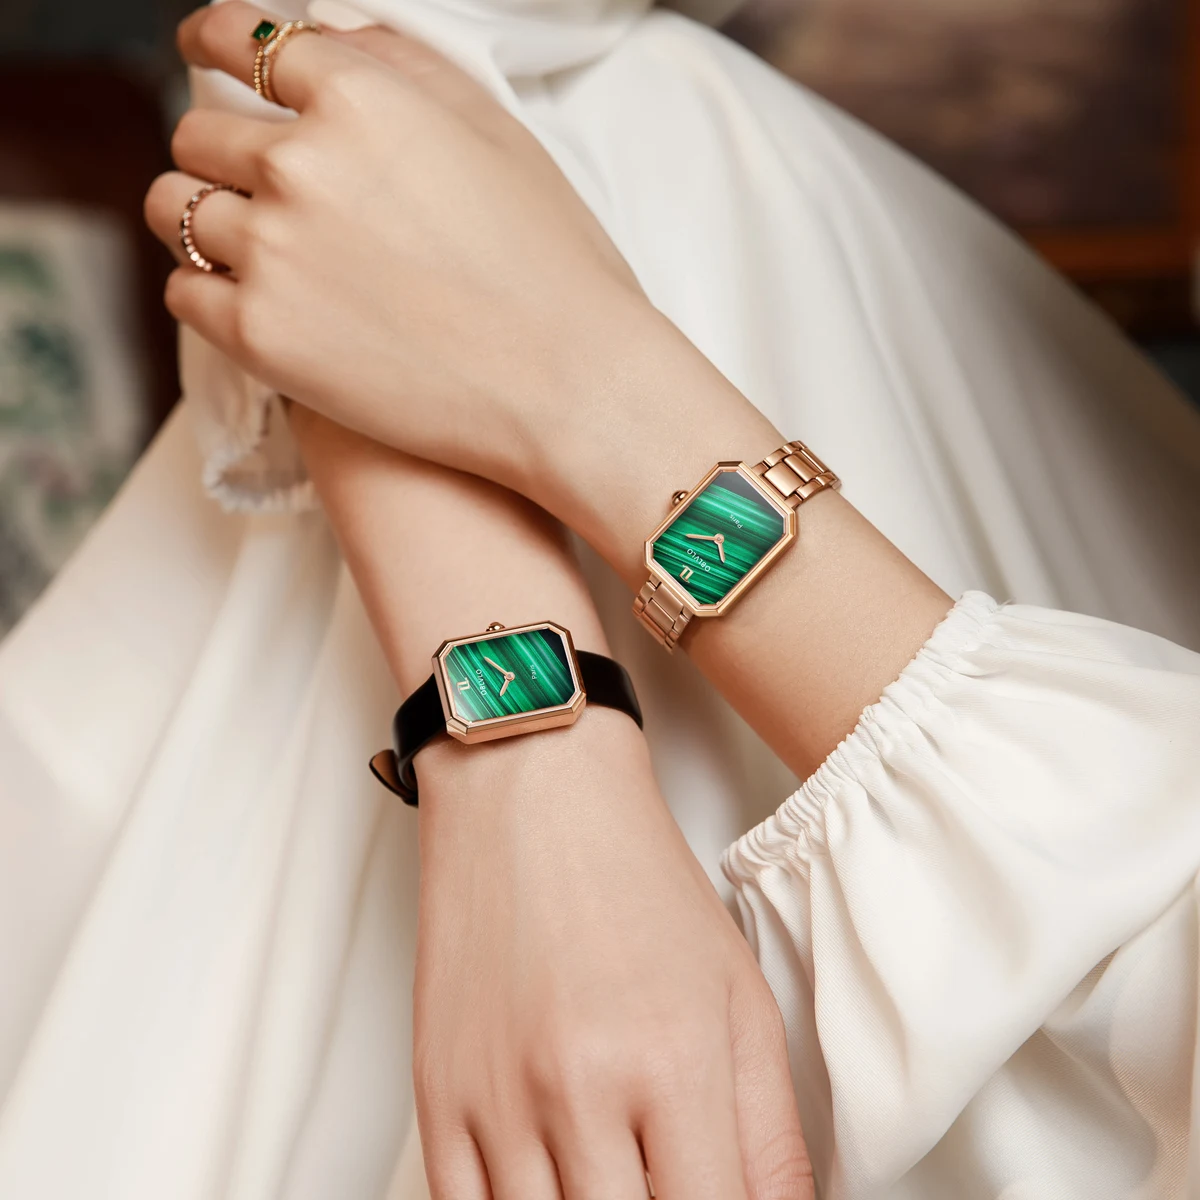 OBLVLO Women Quartz Watch Rose Gold Case Gift Leather Strap Malachite Dial Diamond Surface Sapphire Small Square Clock 23mm LW2 enlarge